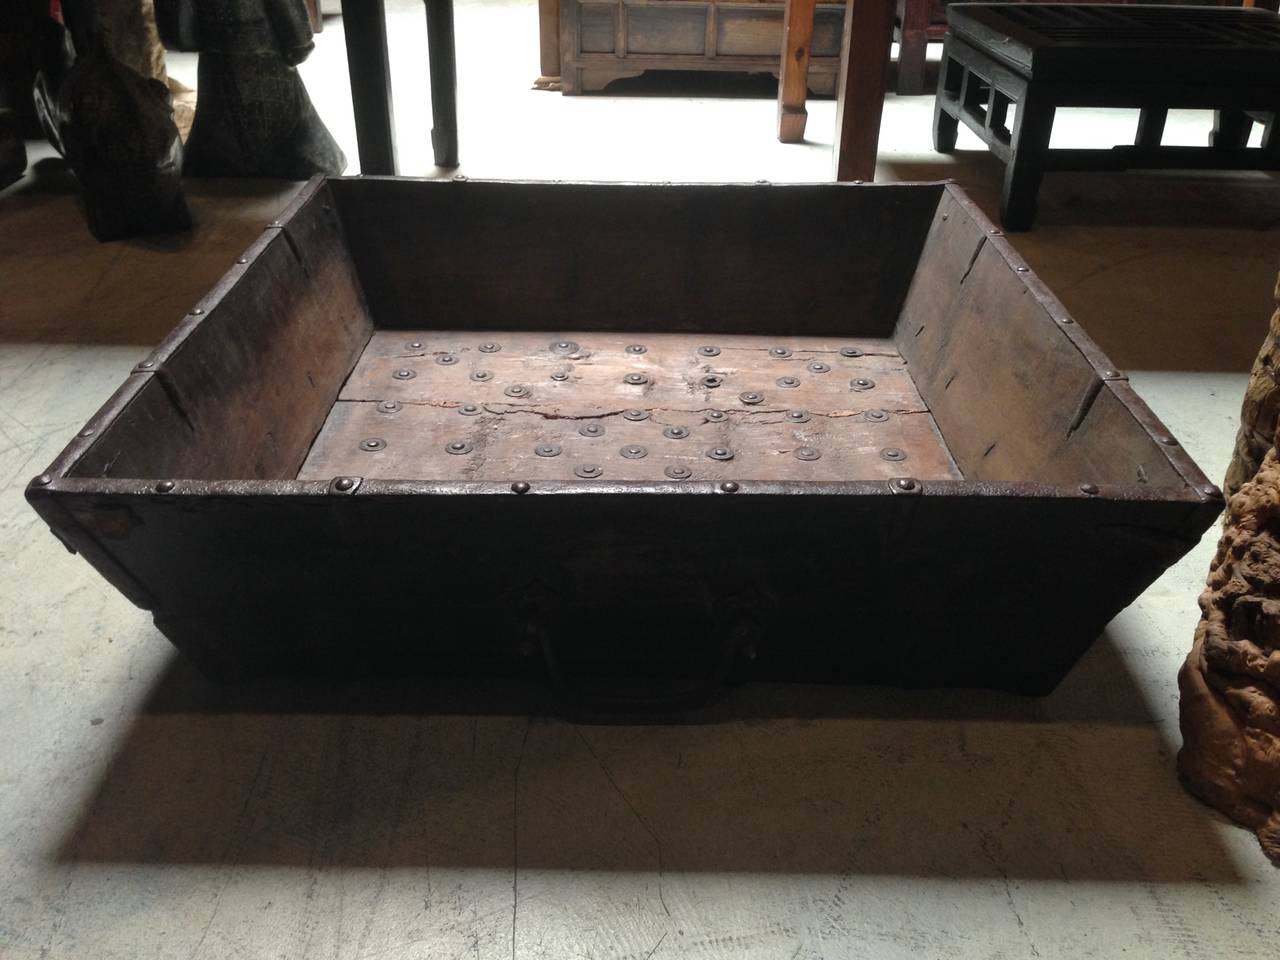 This fantastic wooden trough is truly substantial. Solid wood is decorated with beautiful iron studs. What makes the trough special and very valuable is that these studs are mounted on antique coins. Iron brackets and iron handles further strengthen